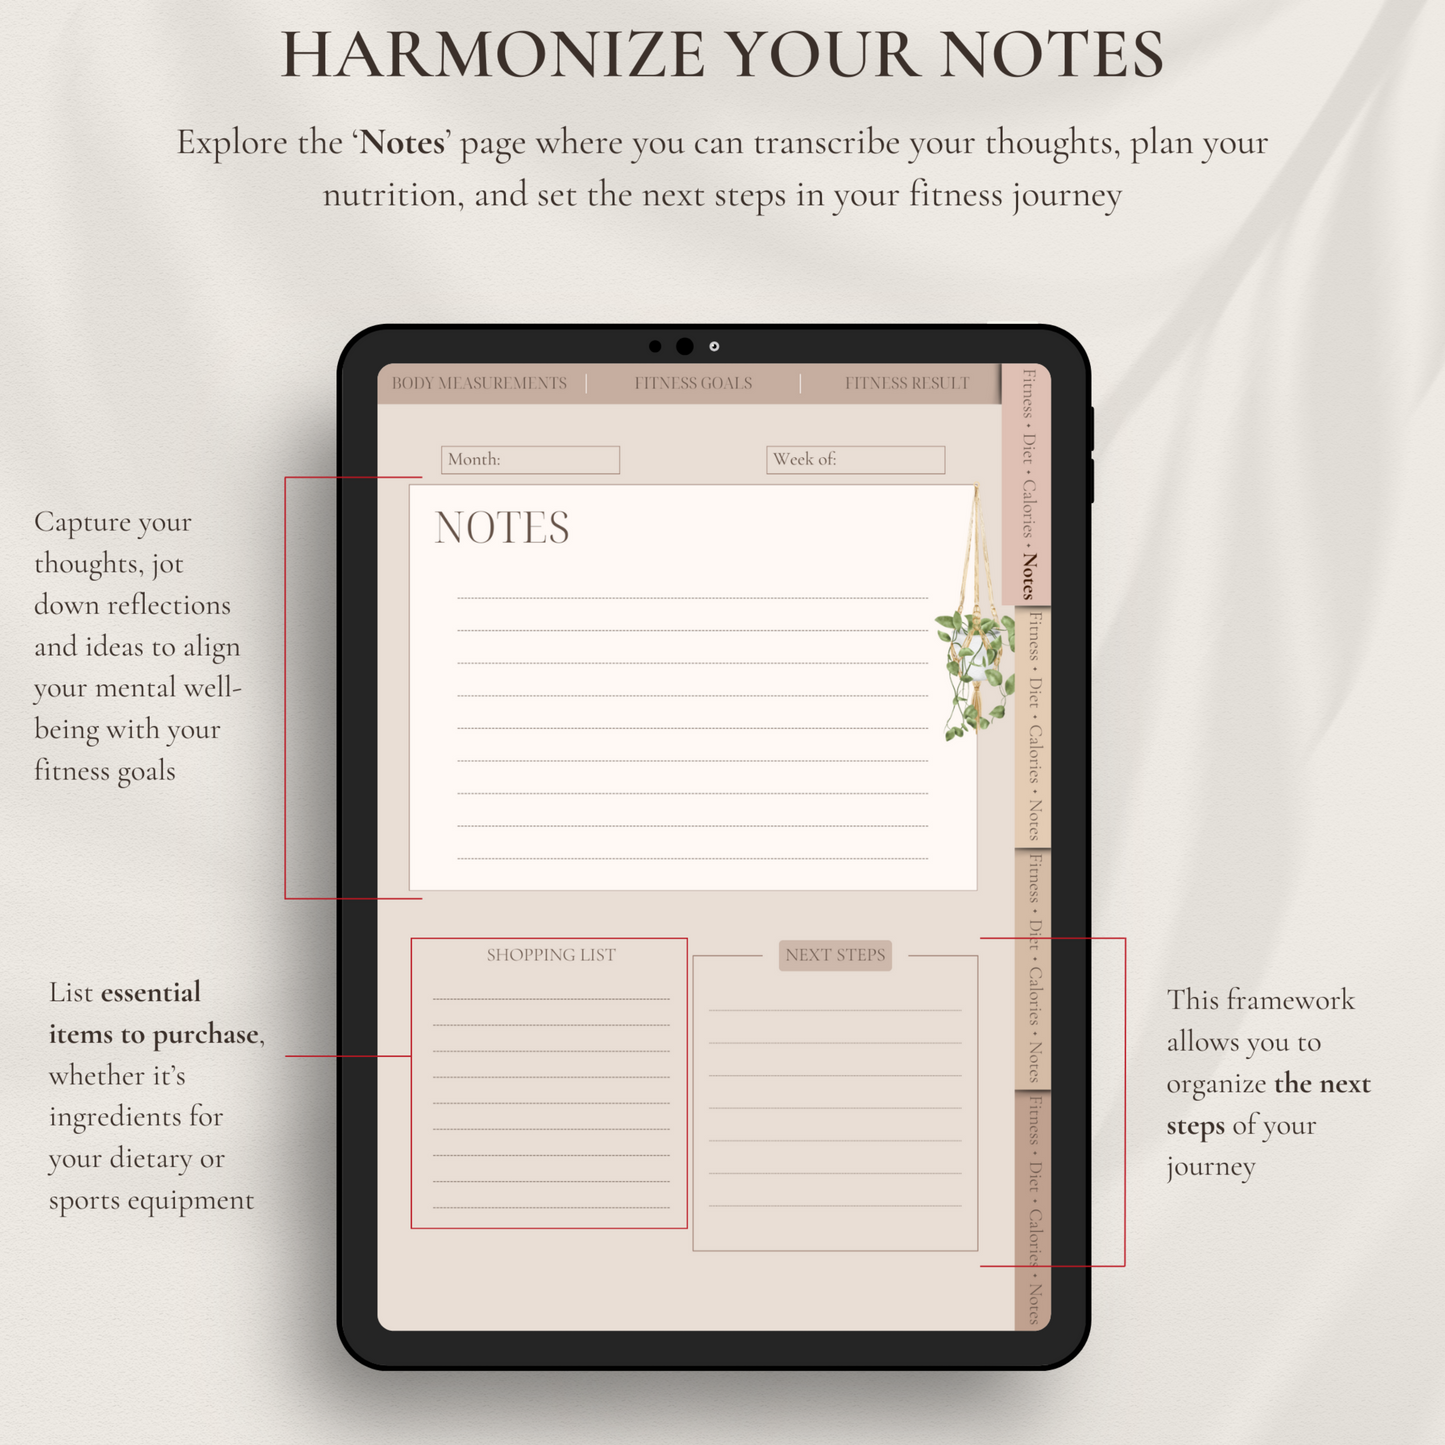 Explore the 'Notes' page where you can transcribe your thoughts, plan your nutrition, and set the next steps in your fitness journey